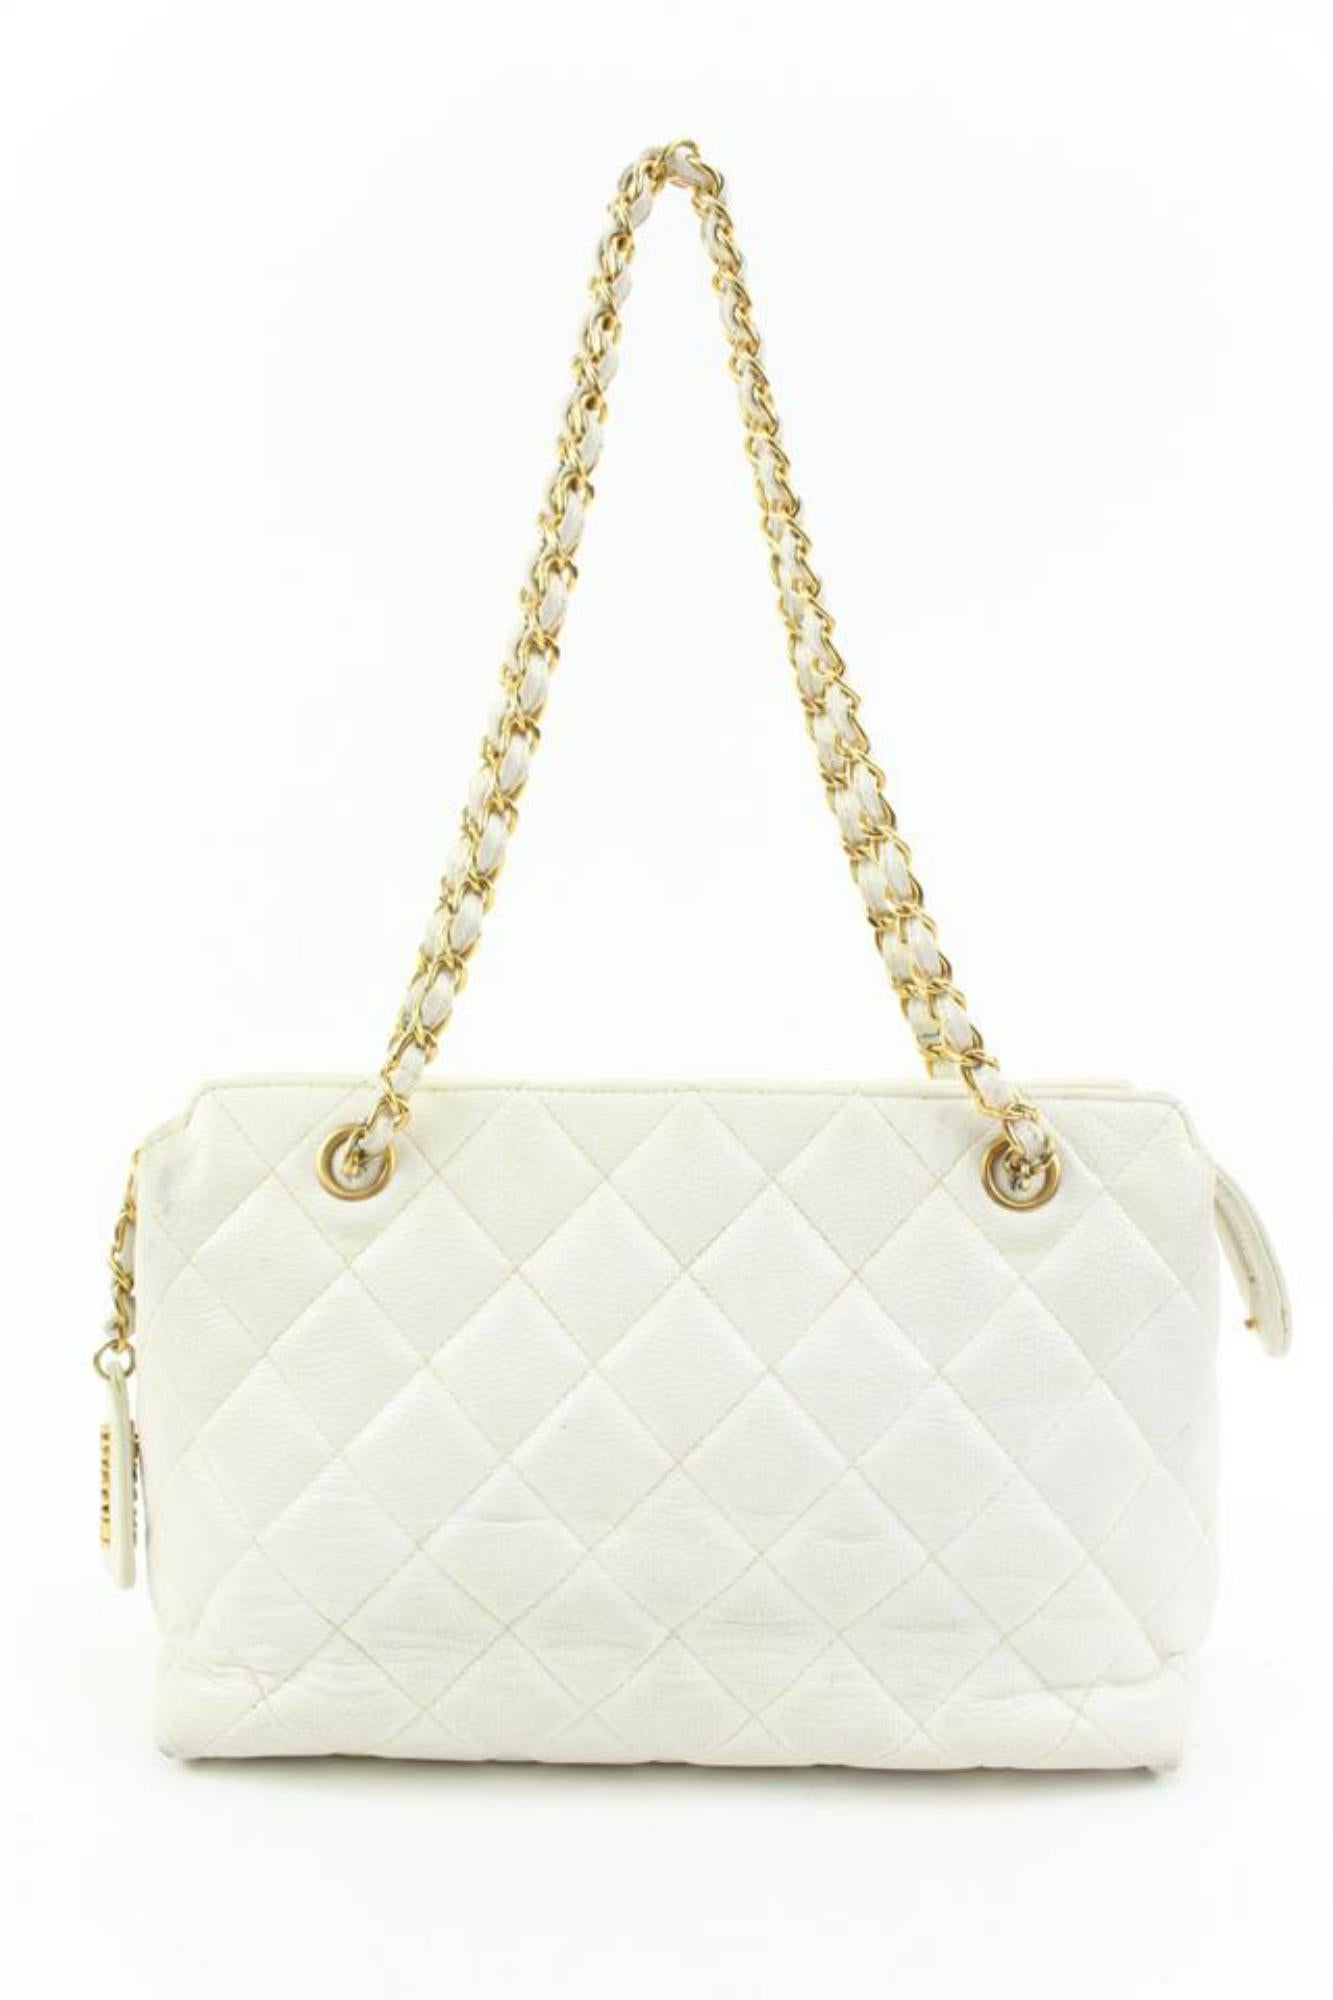 Chanel White Quilted Caviar Gold Chain Shoulder Bag 6ca516 For Sale 2